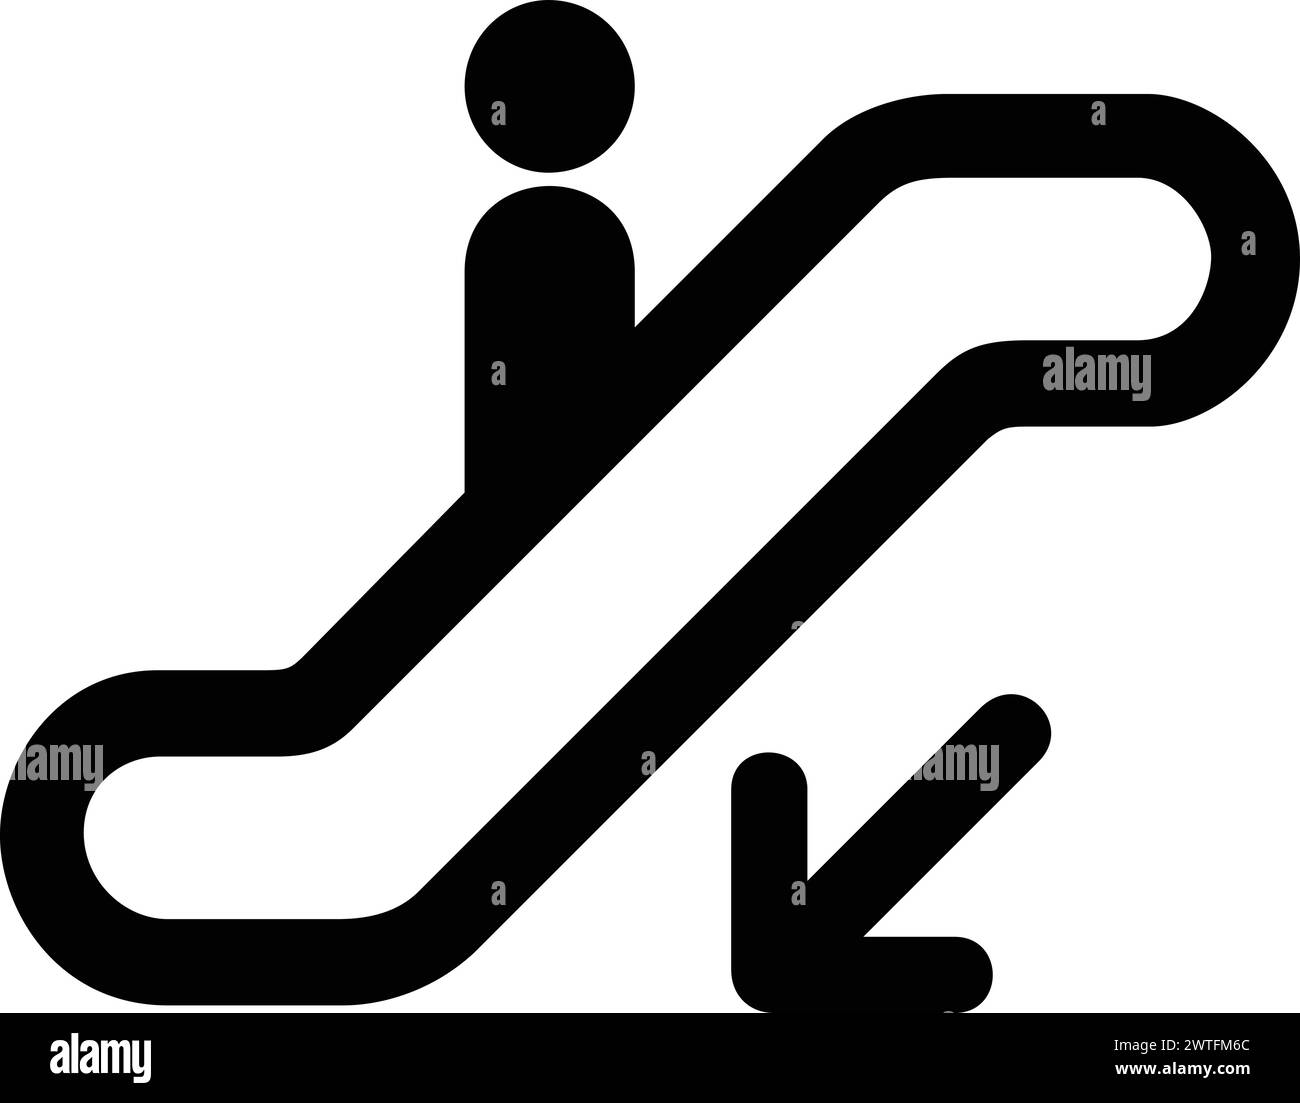 Escalator down flat icon for web. Simple escalator elevator sign web icon silhouette with invert color. Escalator going up and down solid black icon v Stock Vector